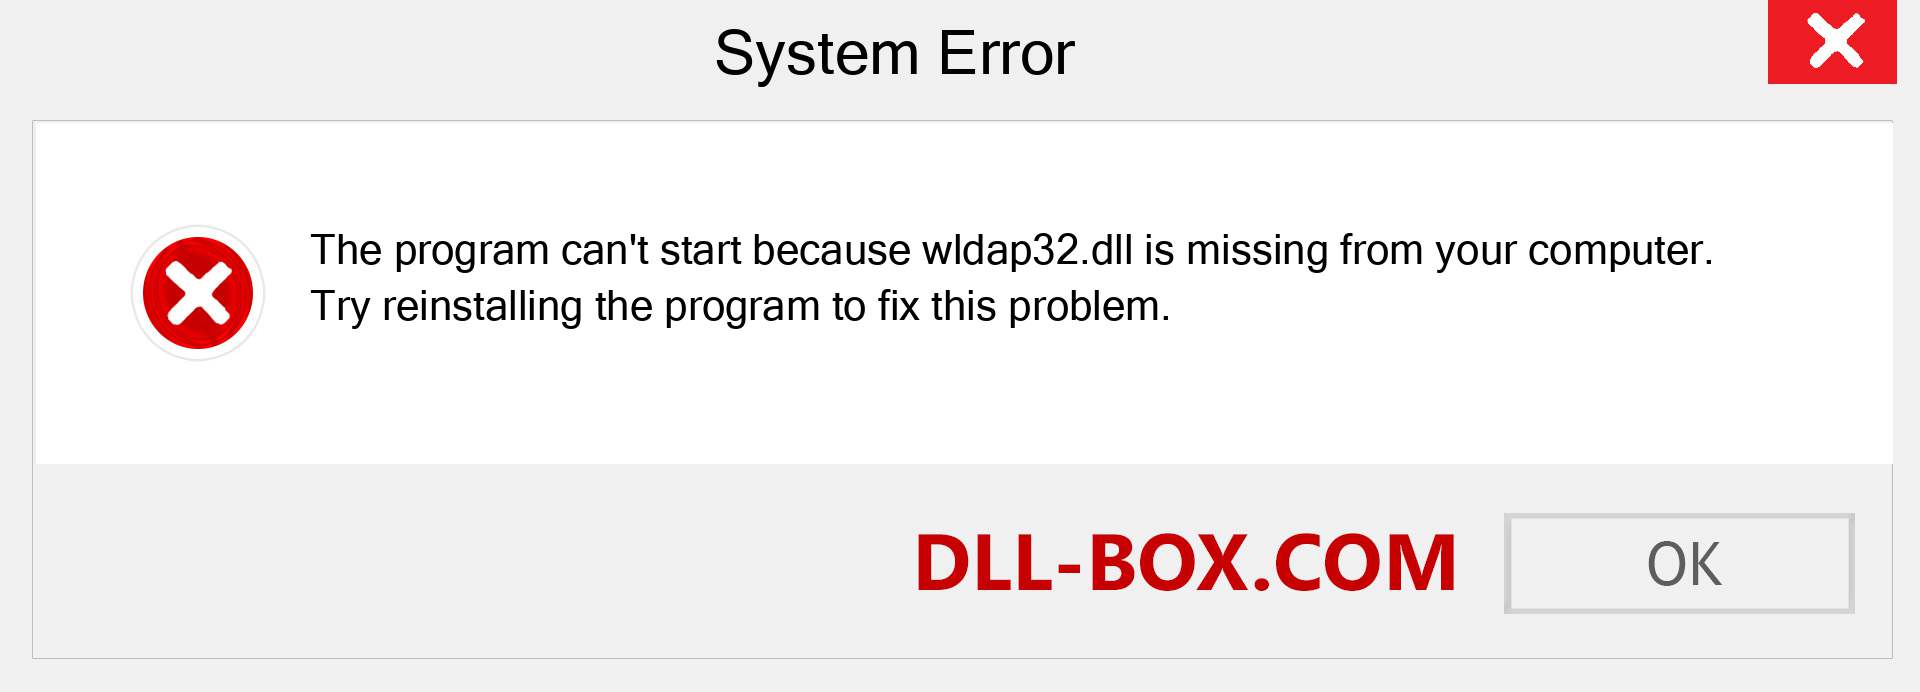  wldap32.dll file is missing?. Download for Windows 7, 8, 10 - Fix  wldap32 dll Missing Error on Windows, photos, images